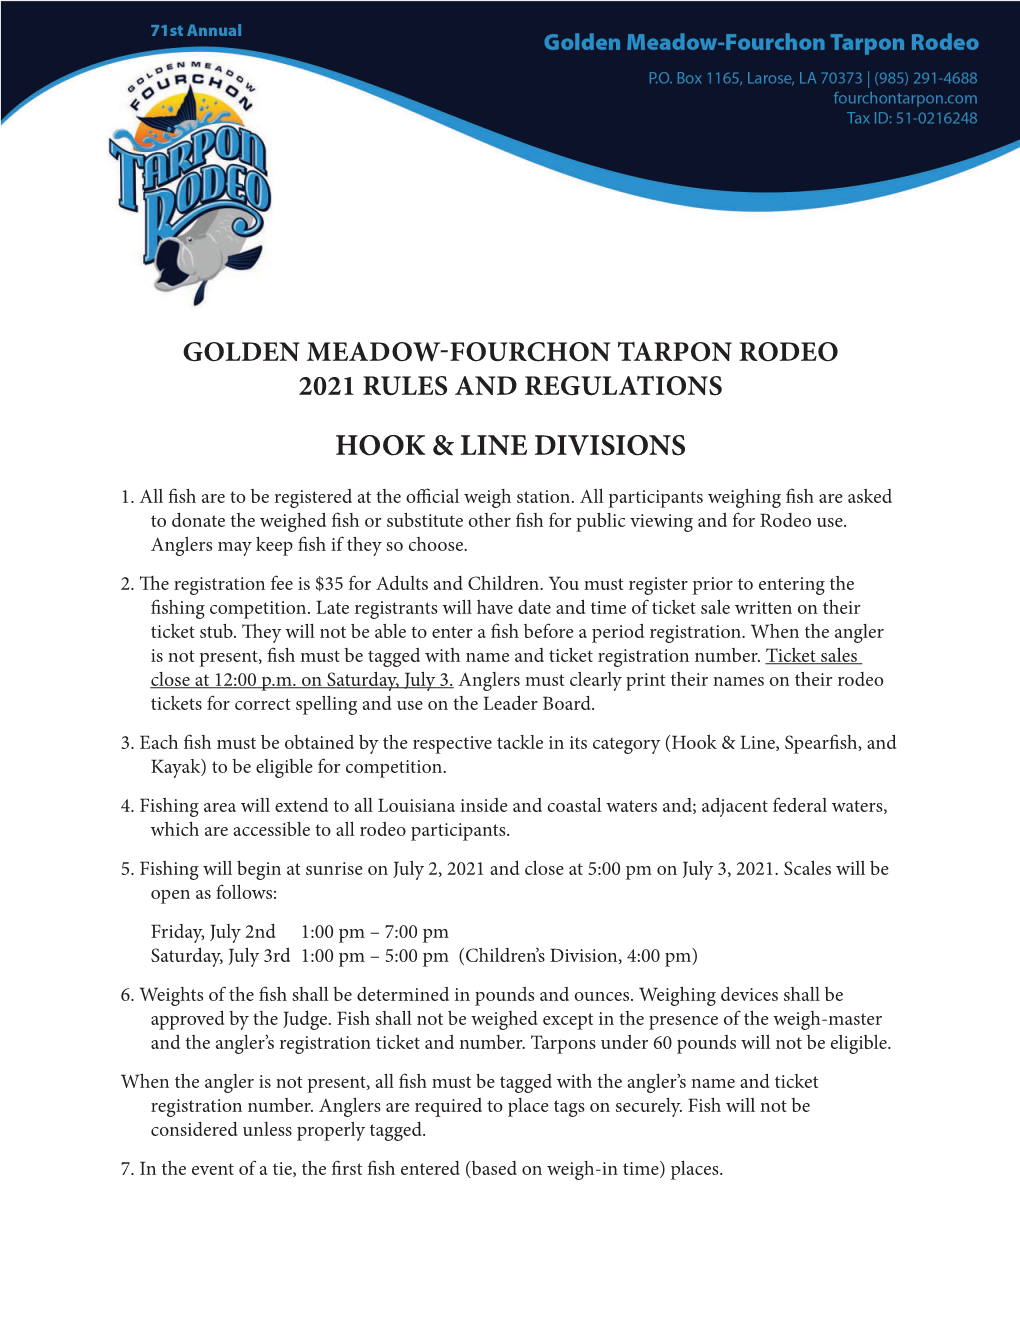 Golden Meadow-Fourchon Tarpon Rodeo 2021 Rules and Regulations